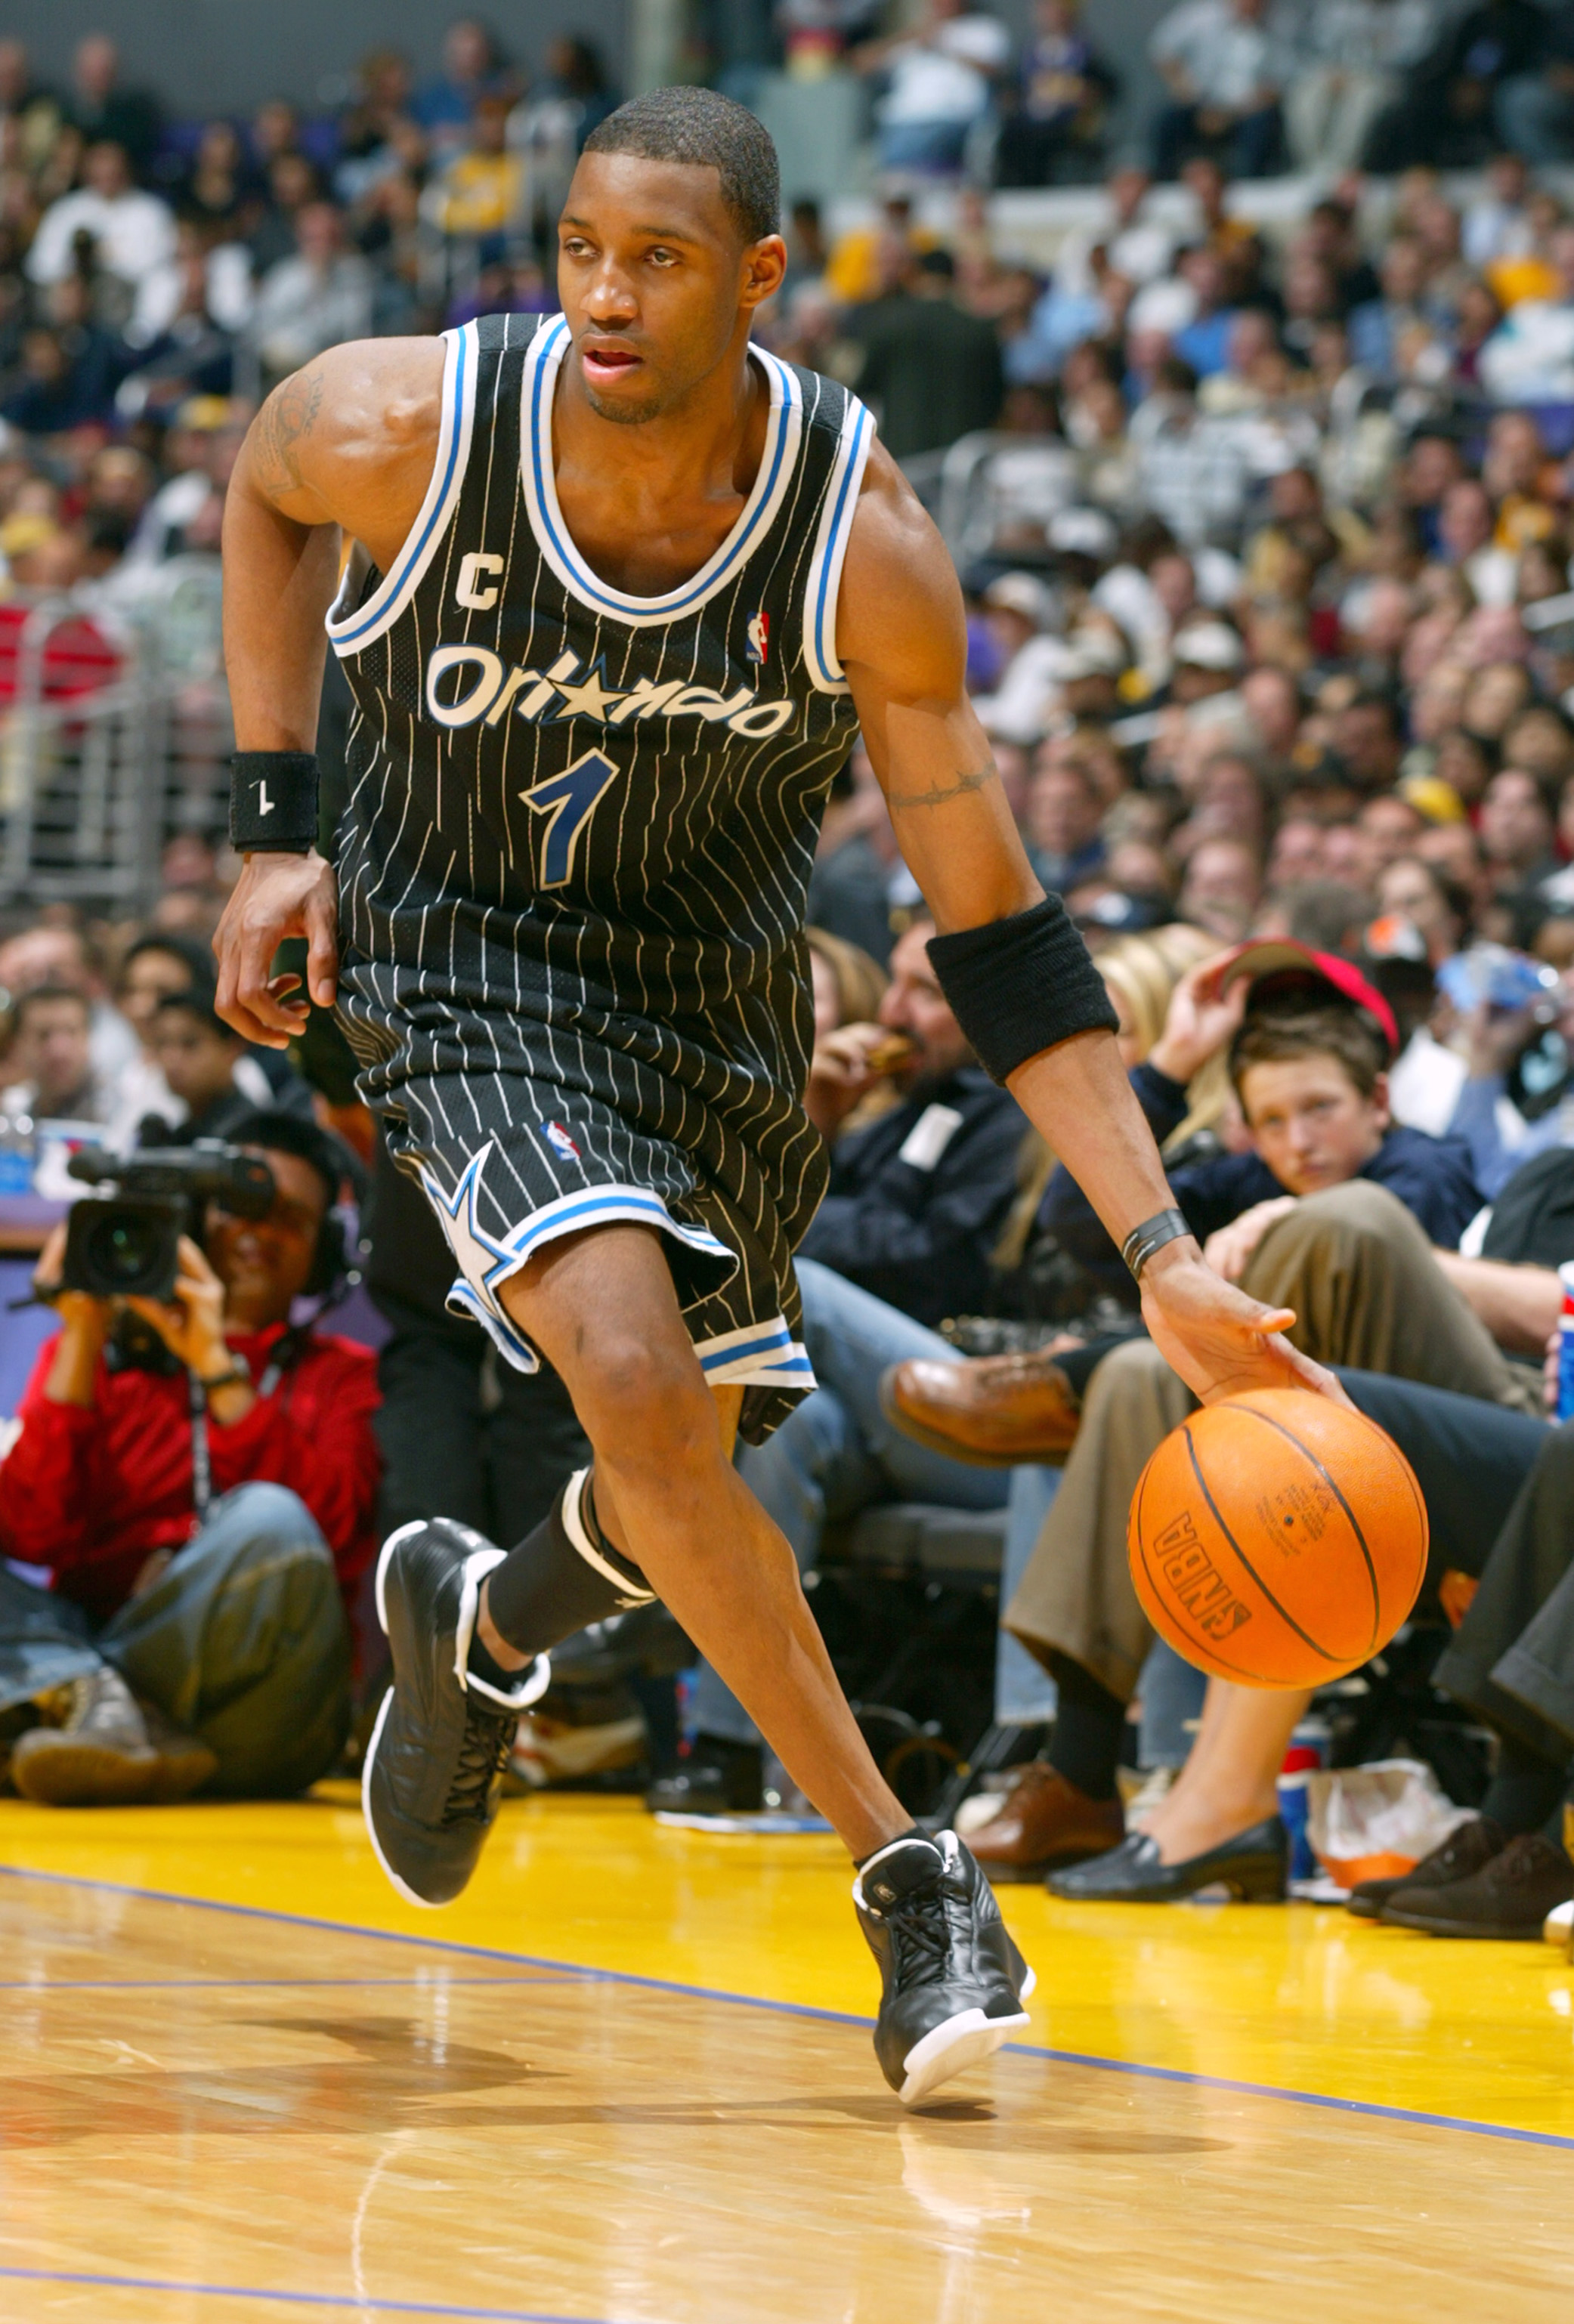 Goldstone's Top 30 players in Orlando Magic history: 1-10